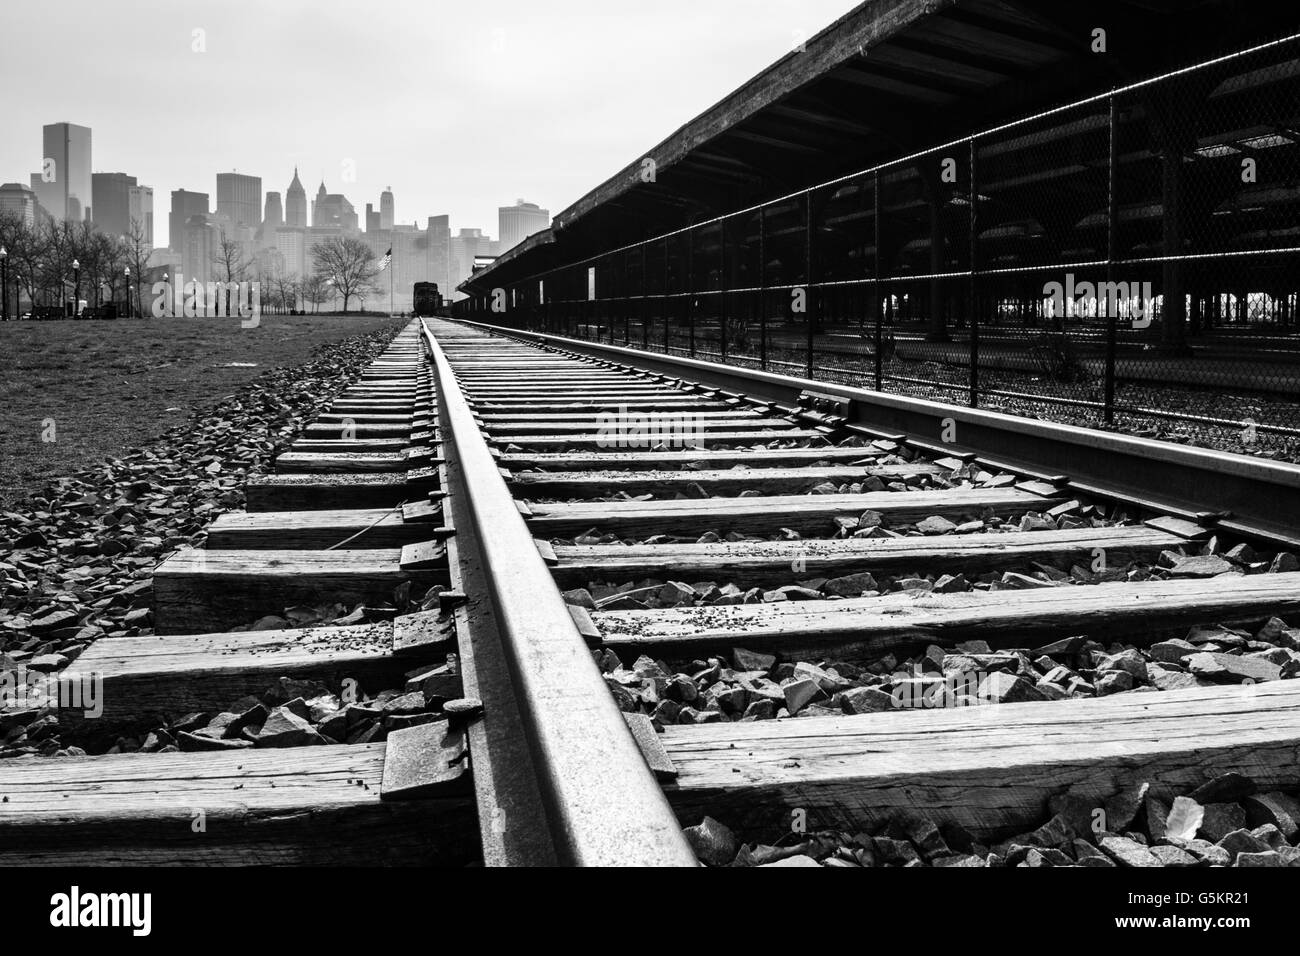 An abandoned railroad tracks with Manhattan in the background Stock Photo